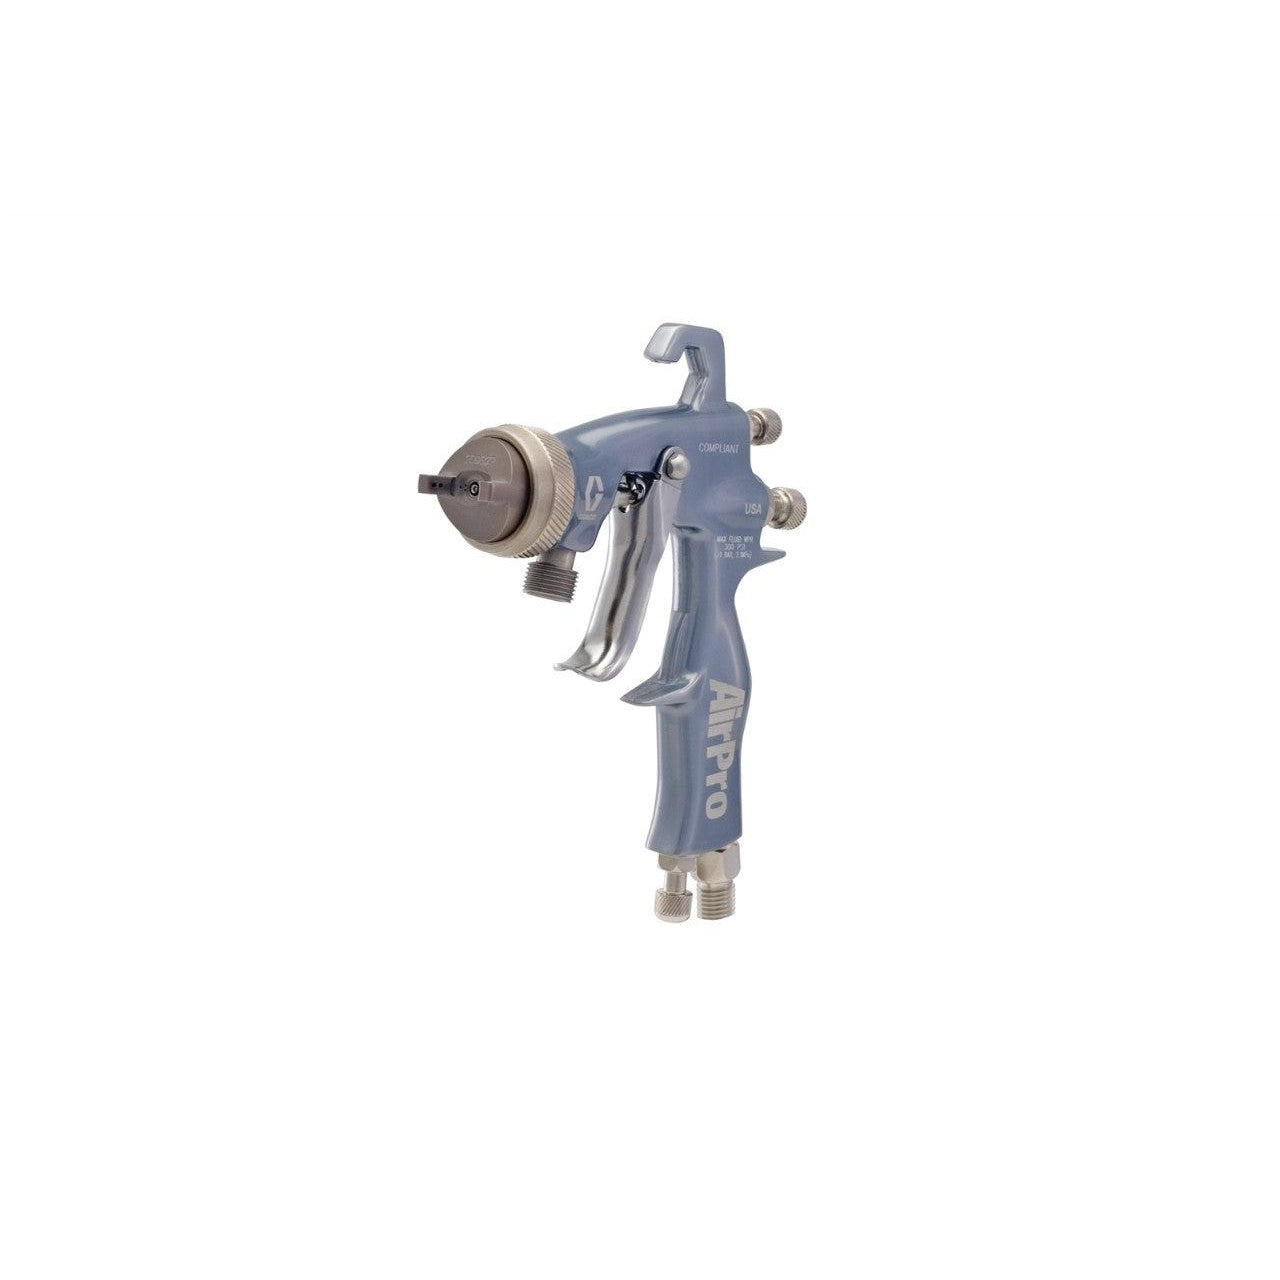 AirPro Air Spray Pressure Feed Gun, Compliant, 0.086 inch (2.2 mm) Nozzle, for General Metal Applications